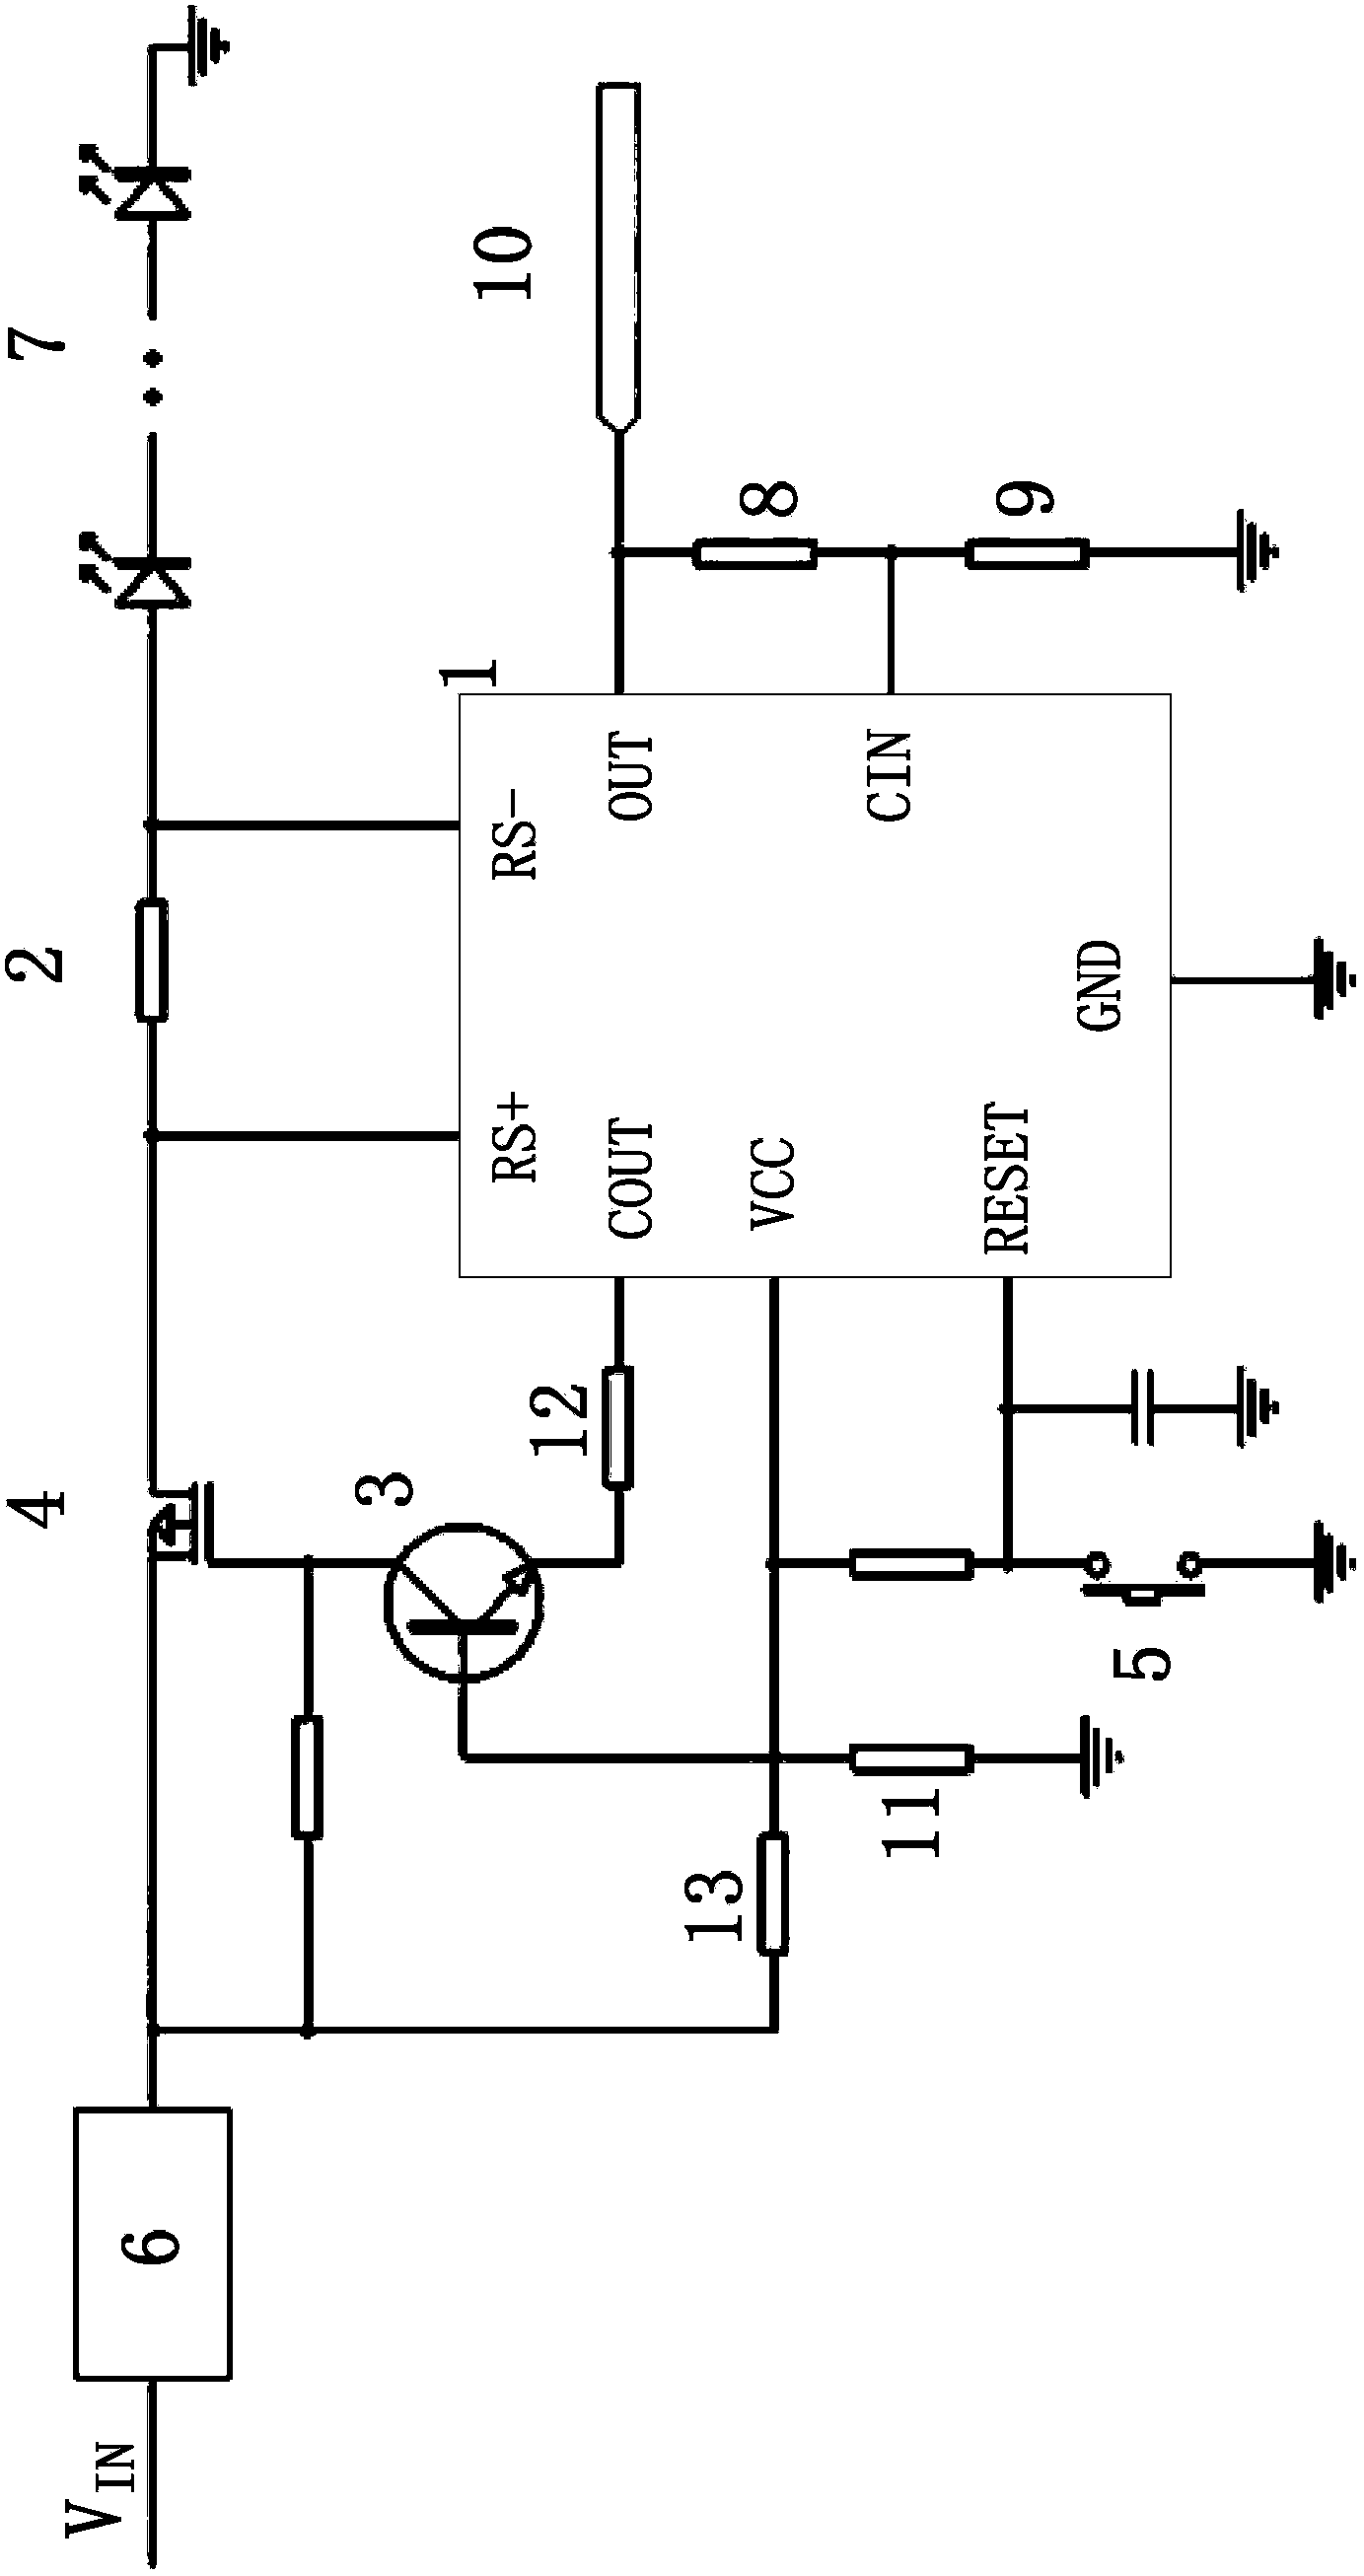 LED (Light-Emitting Diode) lamp and electronic breaker thereof